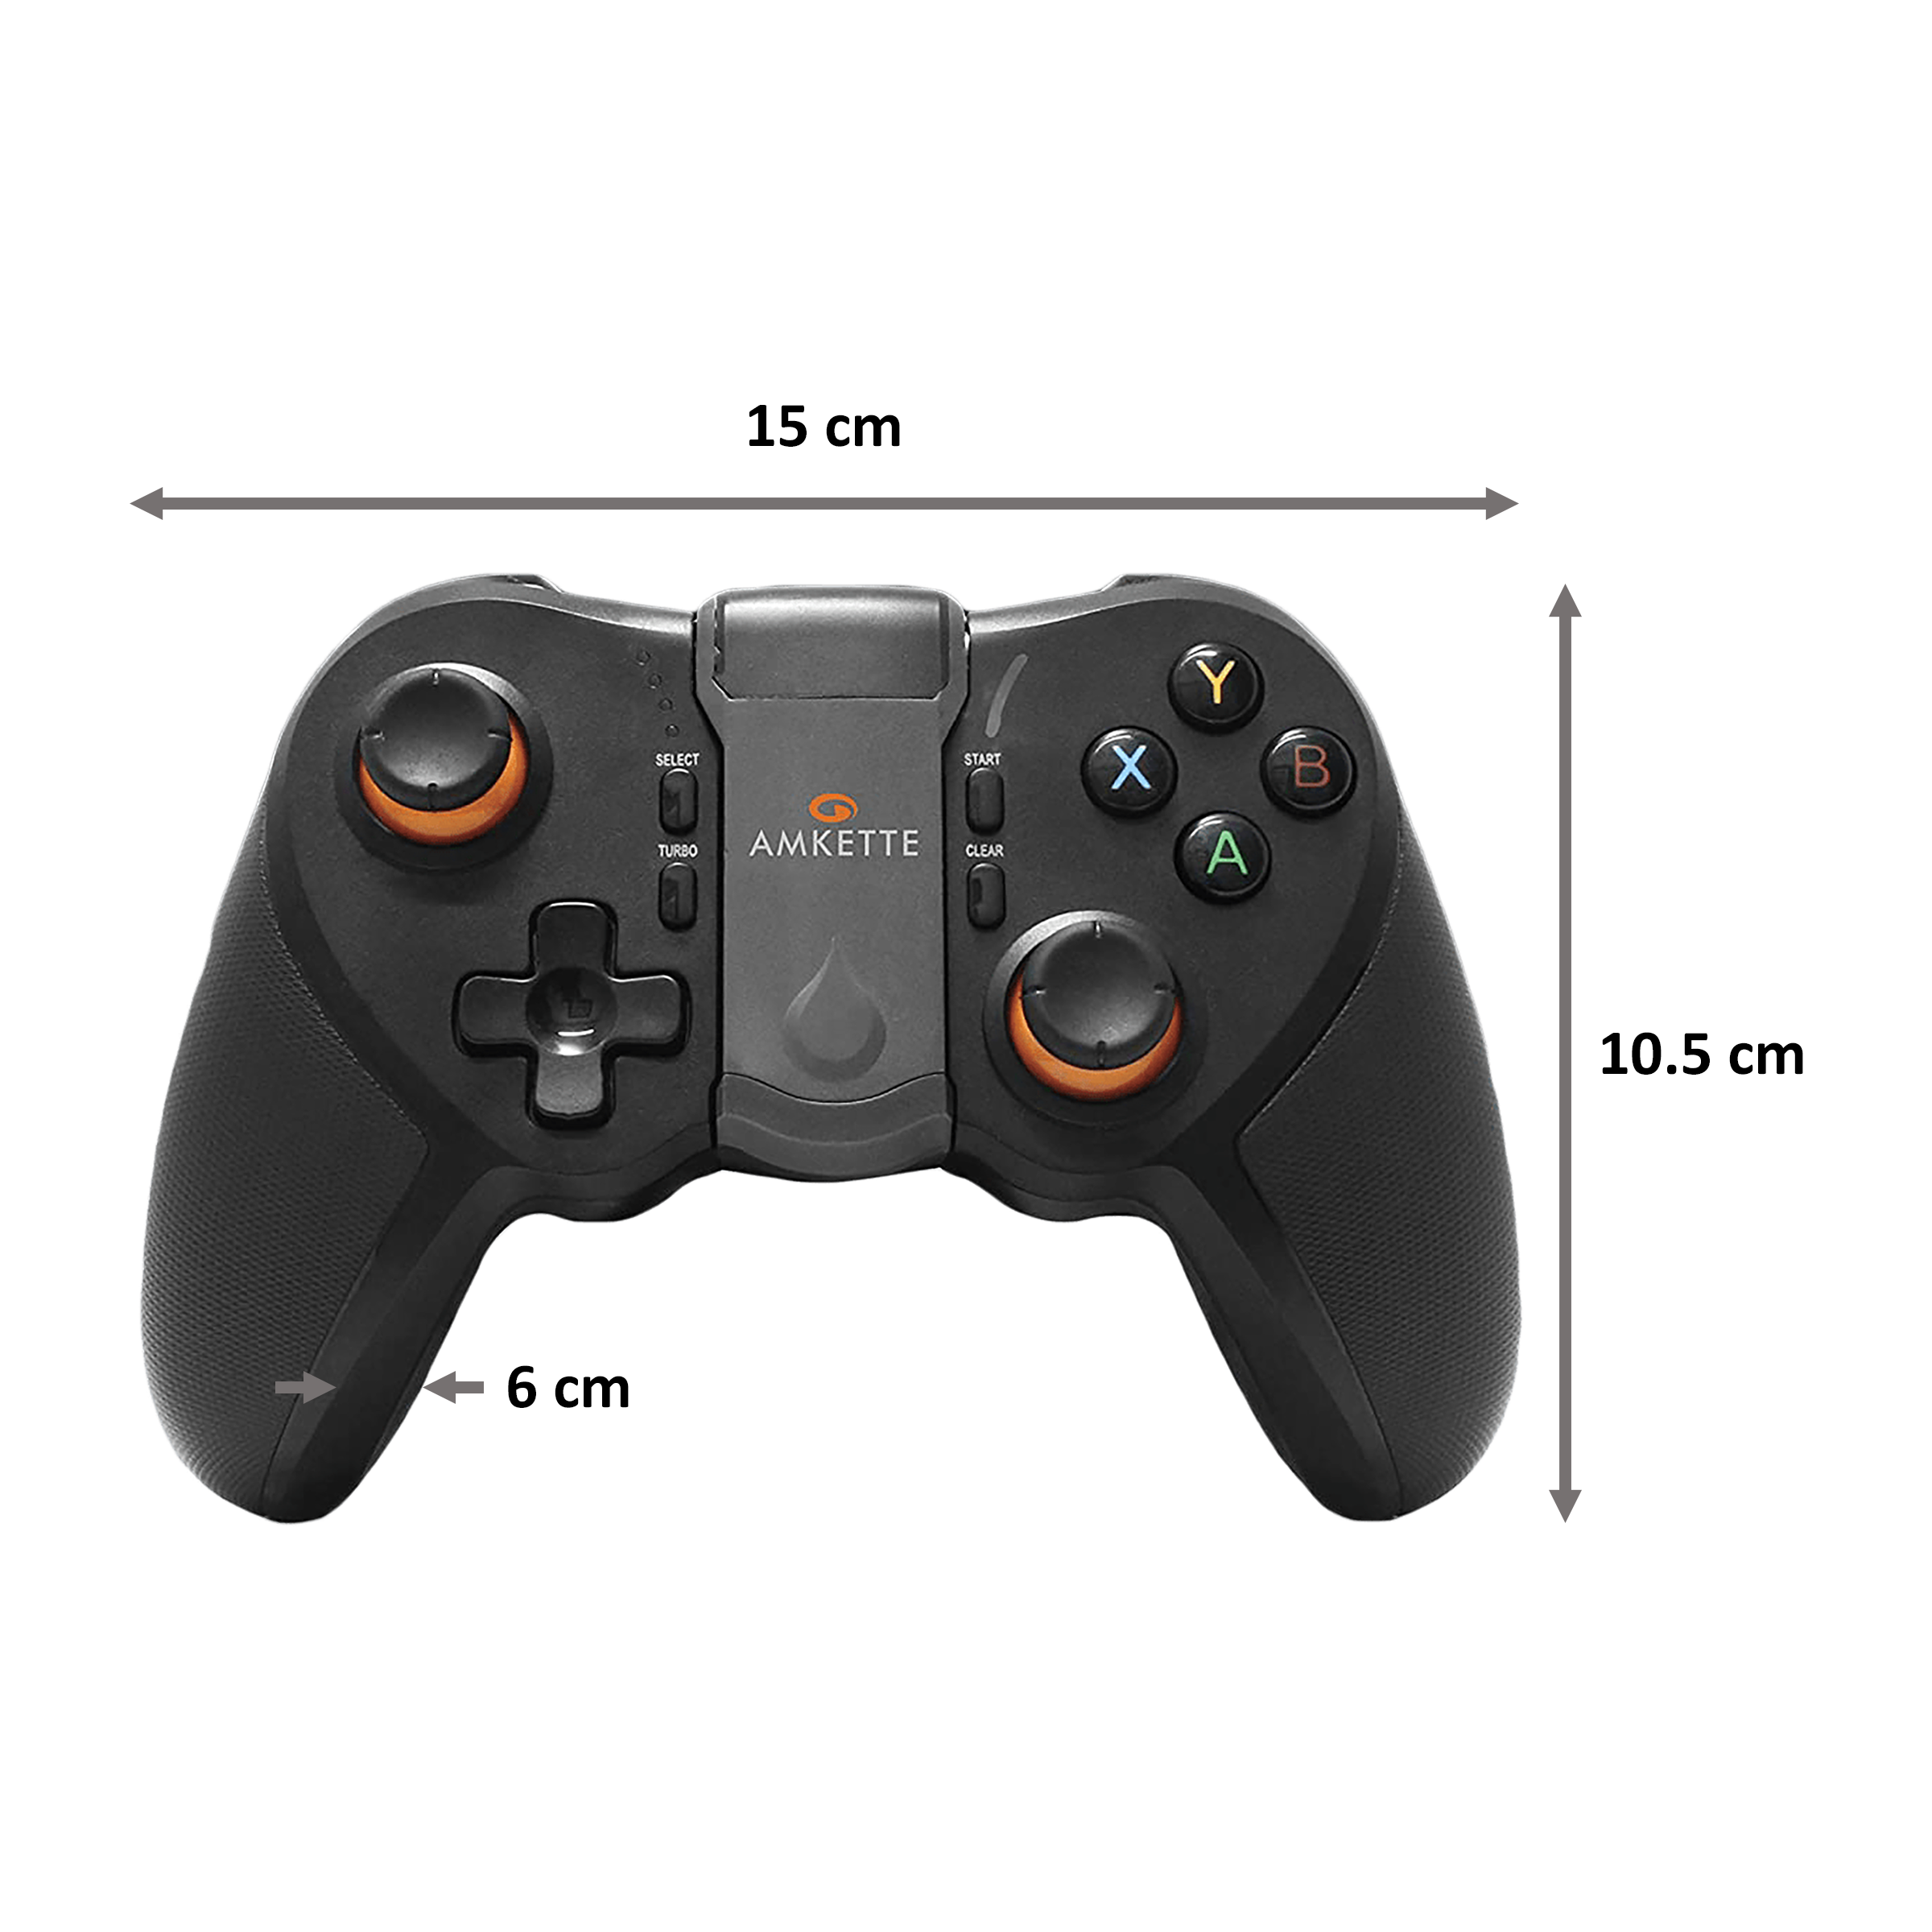 Buy Amkette Evo Gamepad Pro 4 Gaming Controller For Android Phones Play for Android, EGP4 829BK, Black) Online - Croma